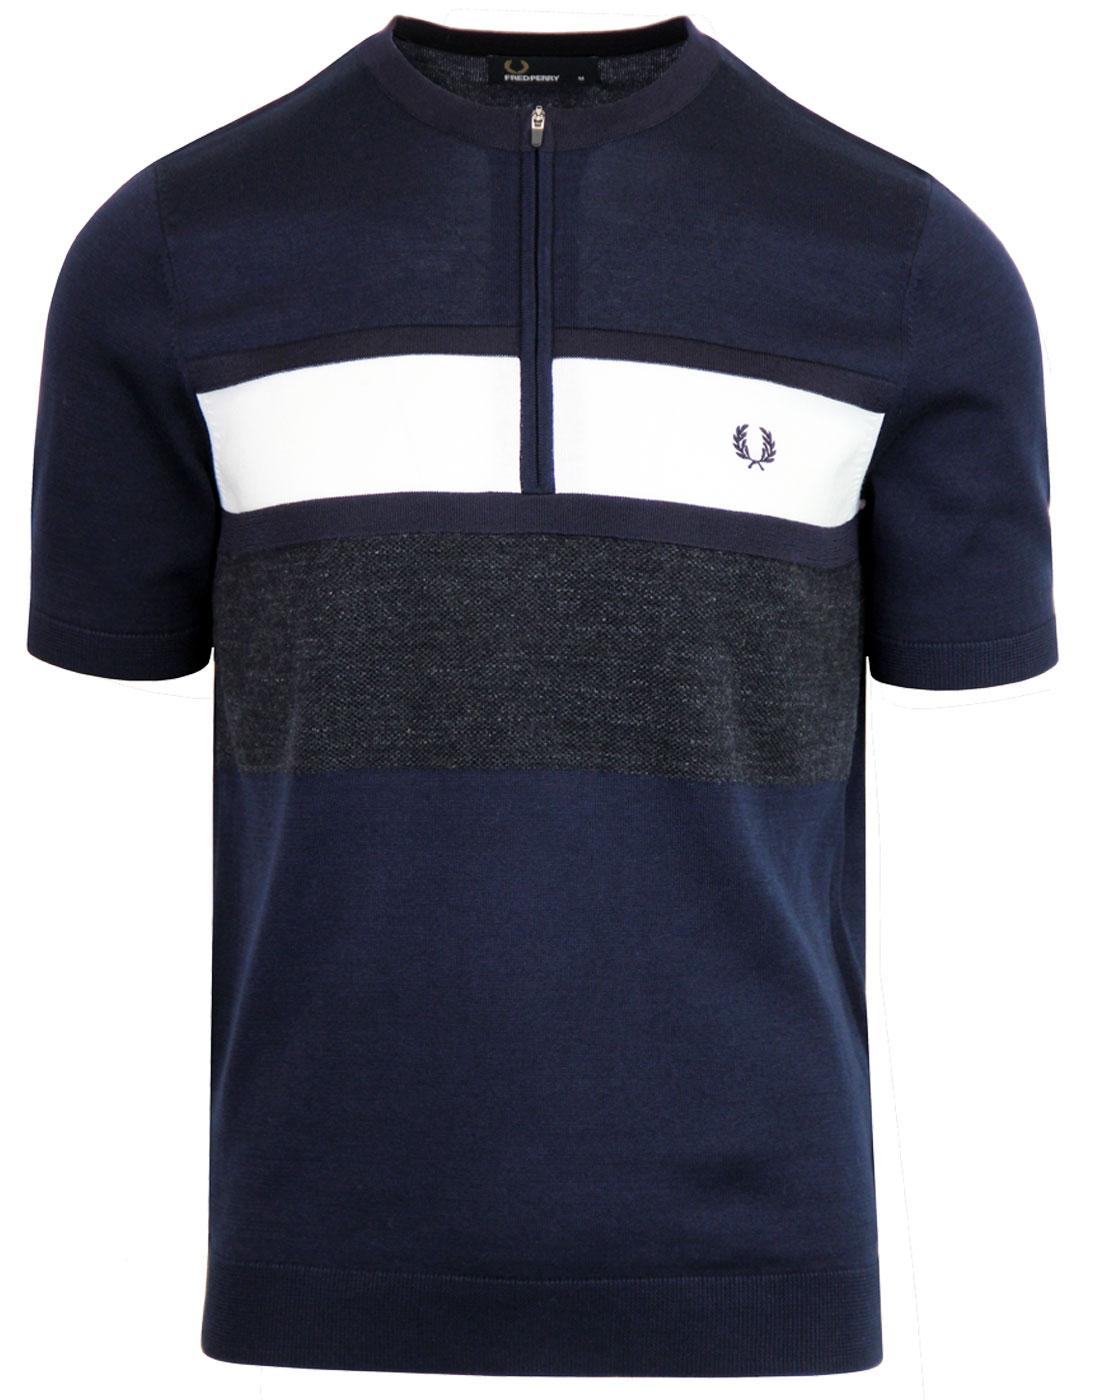 FRED PERRY Retro Knitted Zip Neck Mod Cycling Top